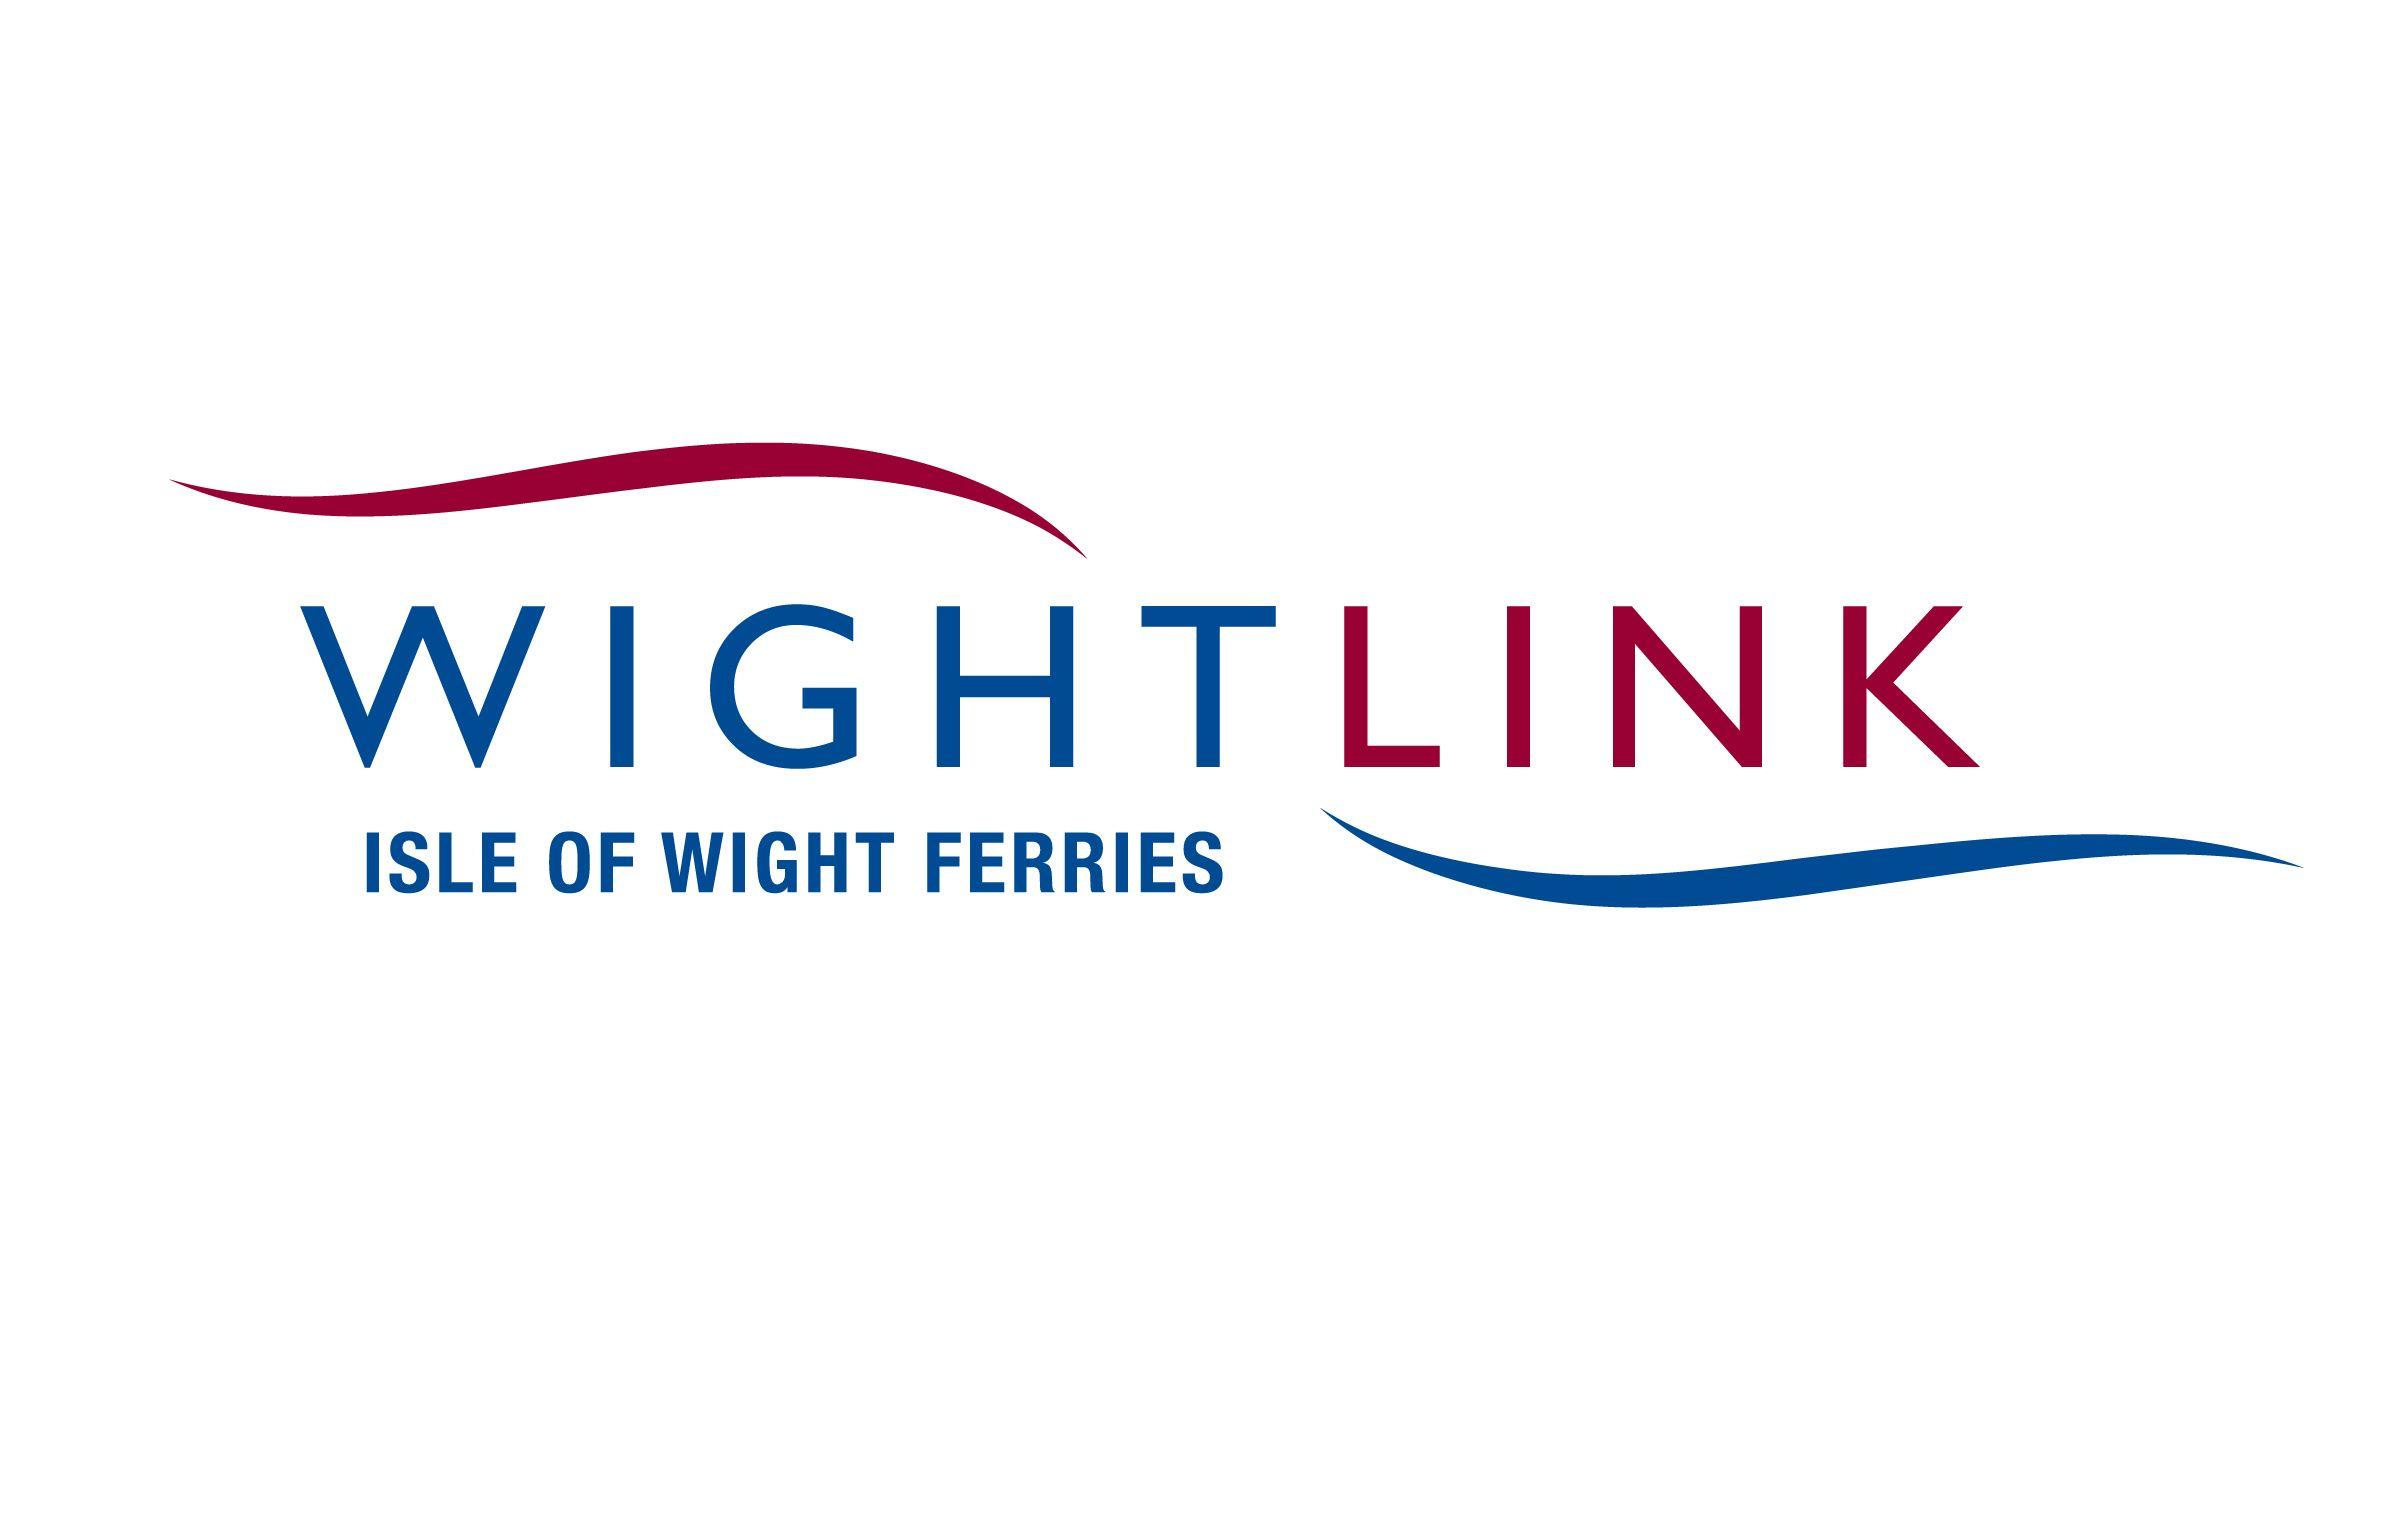 Ryder Logo - WIGHTLINK ANNOUNCES FURTHER CANCELLATIONS INTO THURSDAY & WIGHT